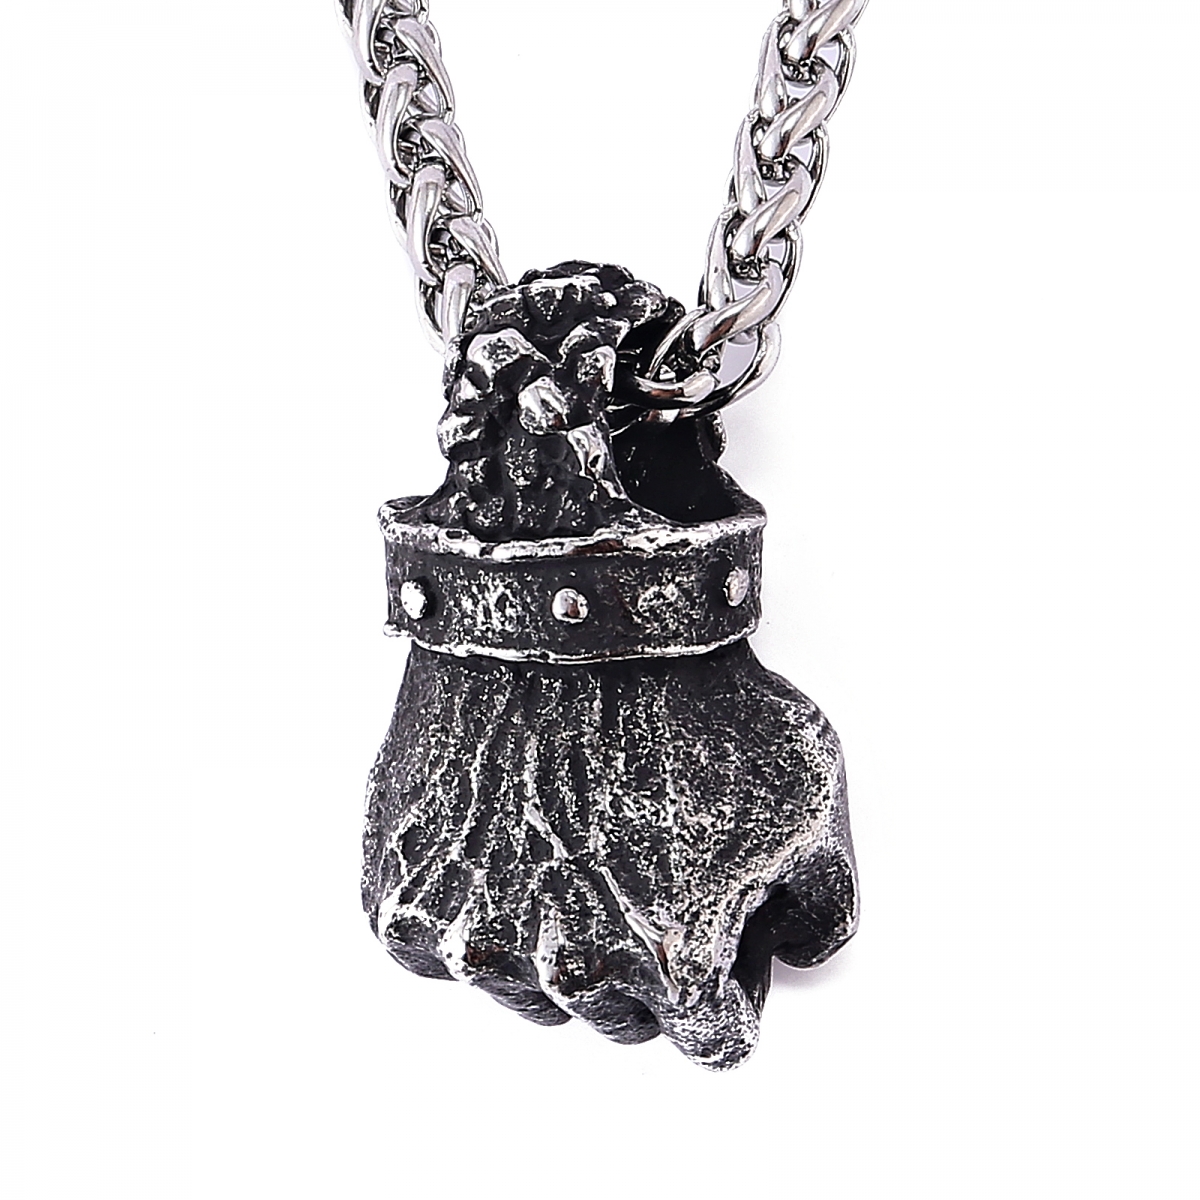 Iron Fist Necklace US$3.5/PC-NORSECOLLECTION- Viking Jewelry,Viking Necklace,Viking Bracelet,Viking Rings,Viking Mugs,Viking Accessories,Viking Crafts